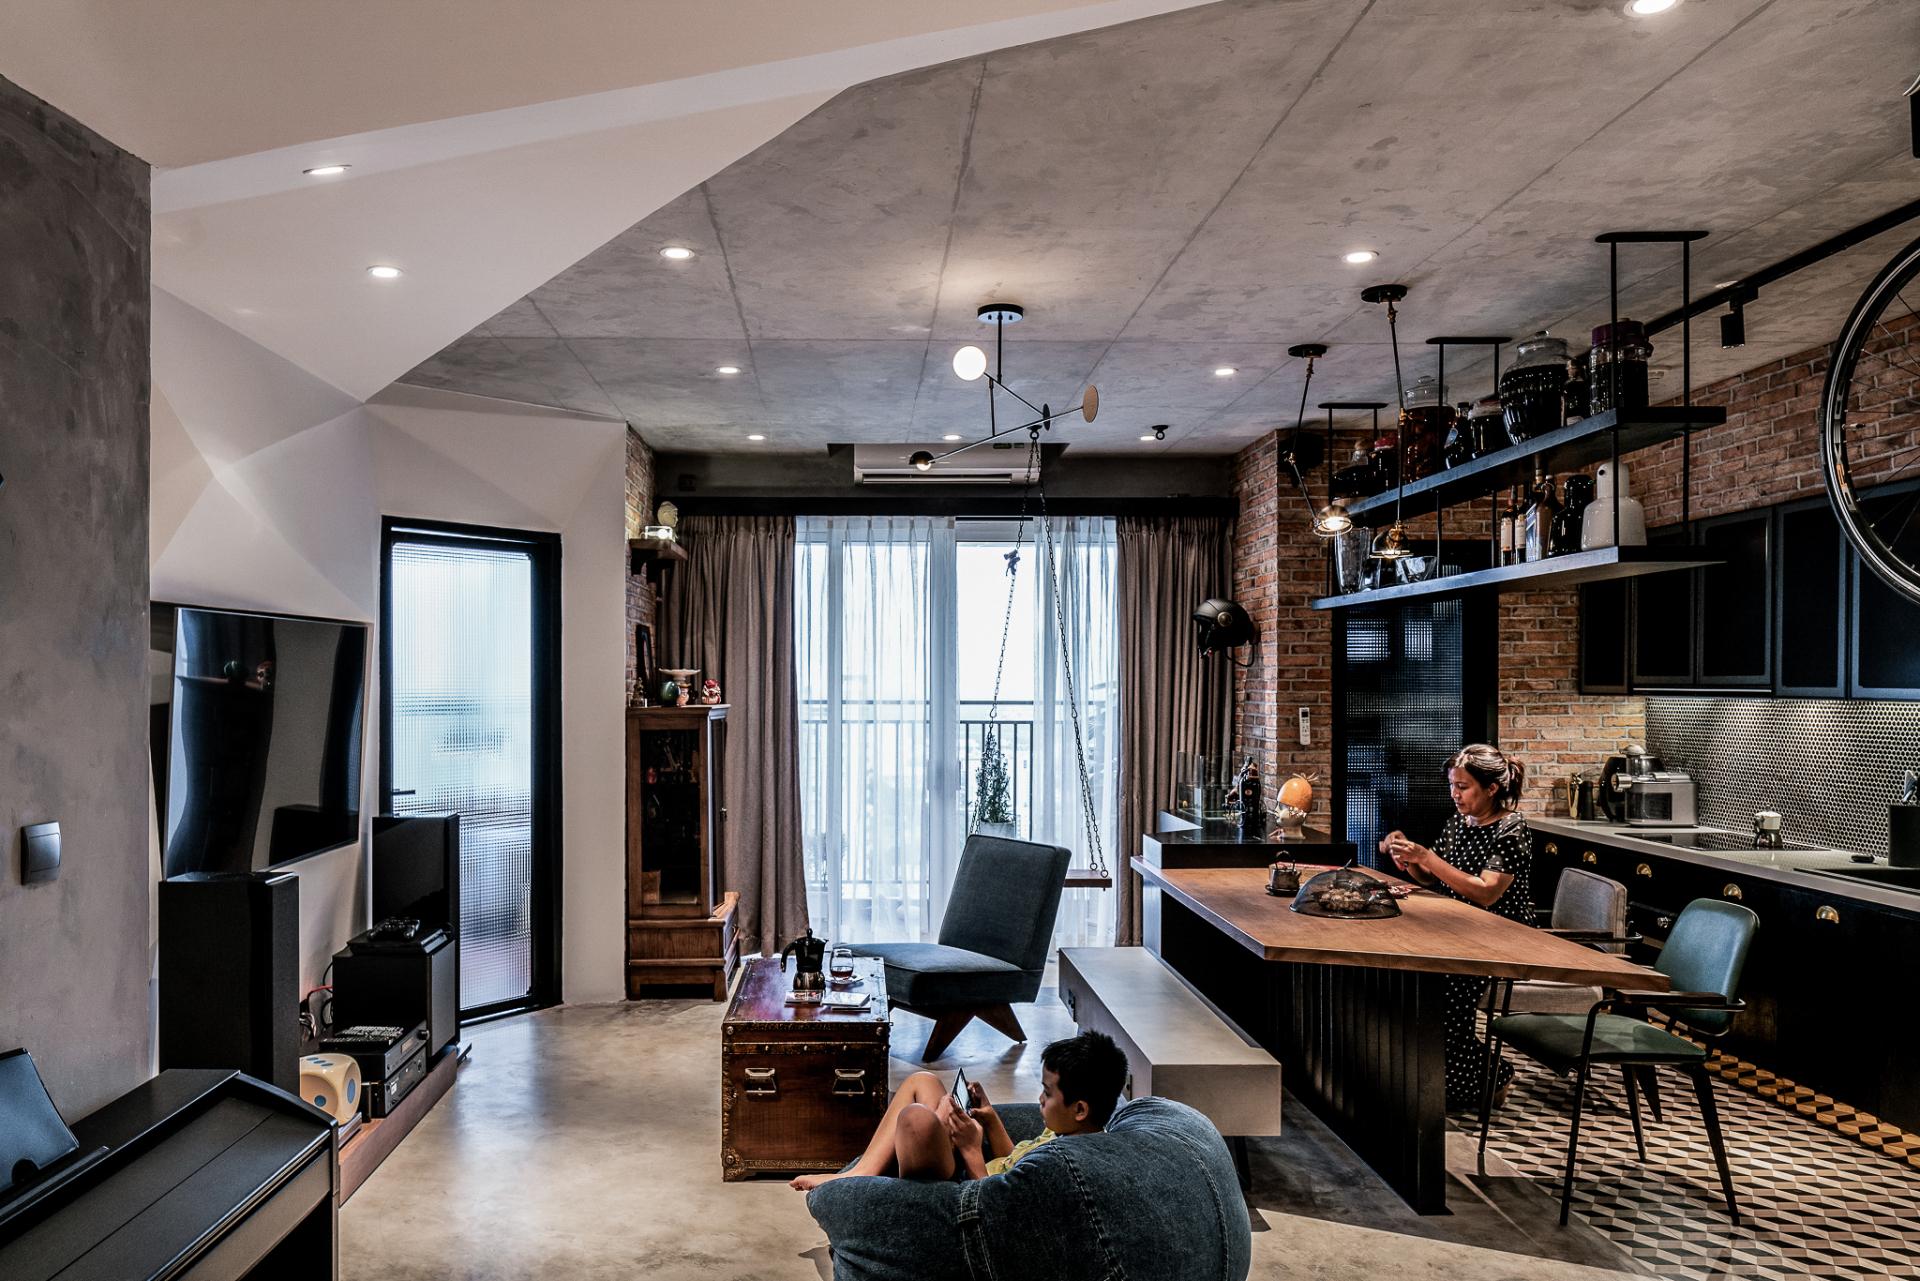 This 1,076 sq. ft. apartment has an industrial accent and a rustic "gangster" style